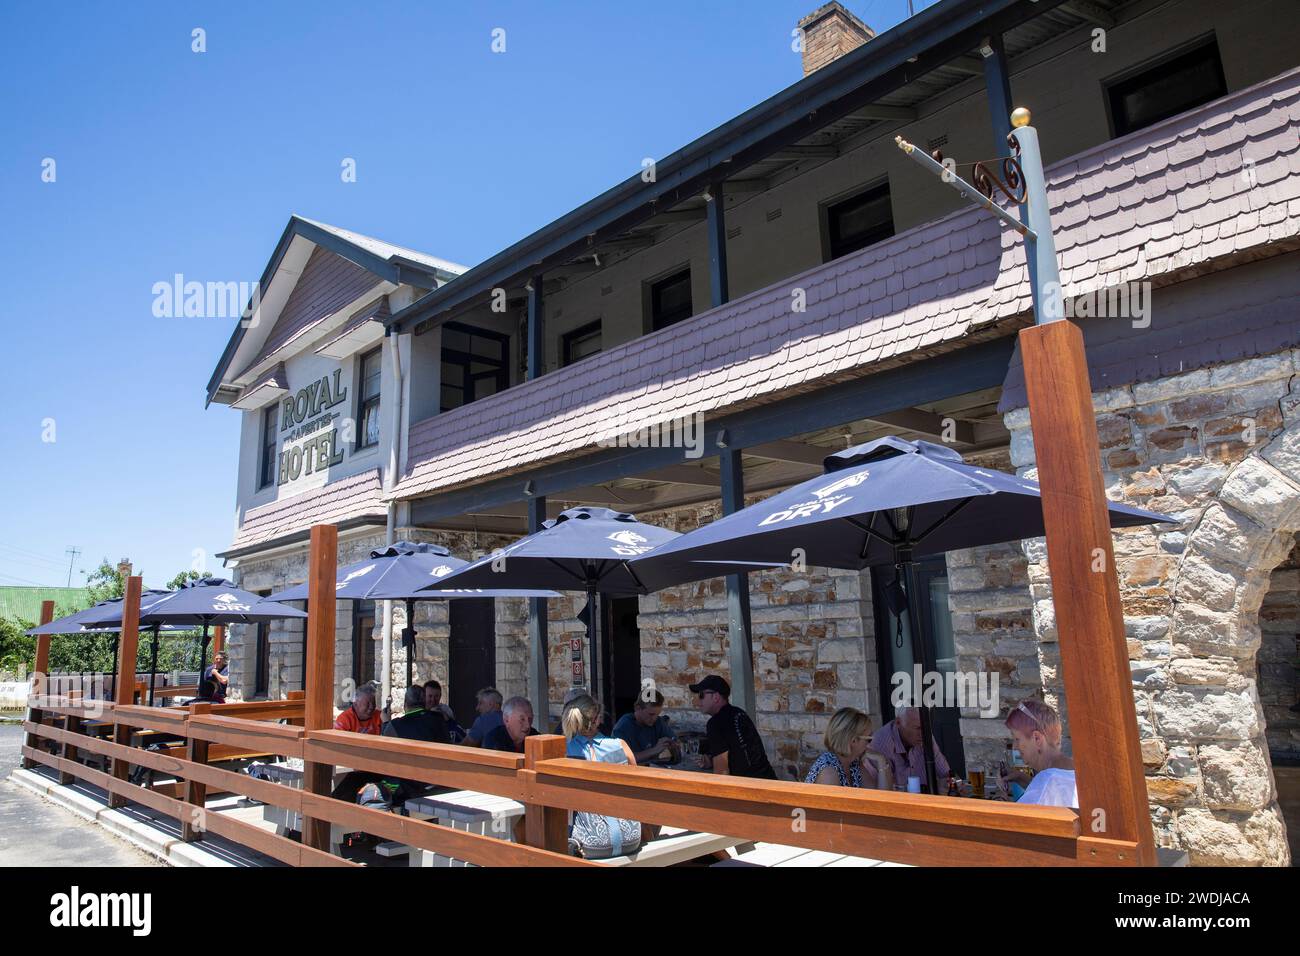 Capertee village in New South Wales and its Royal Hotel public house offering food, beer and rooms, Australia, 2024 Stock Photo